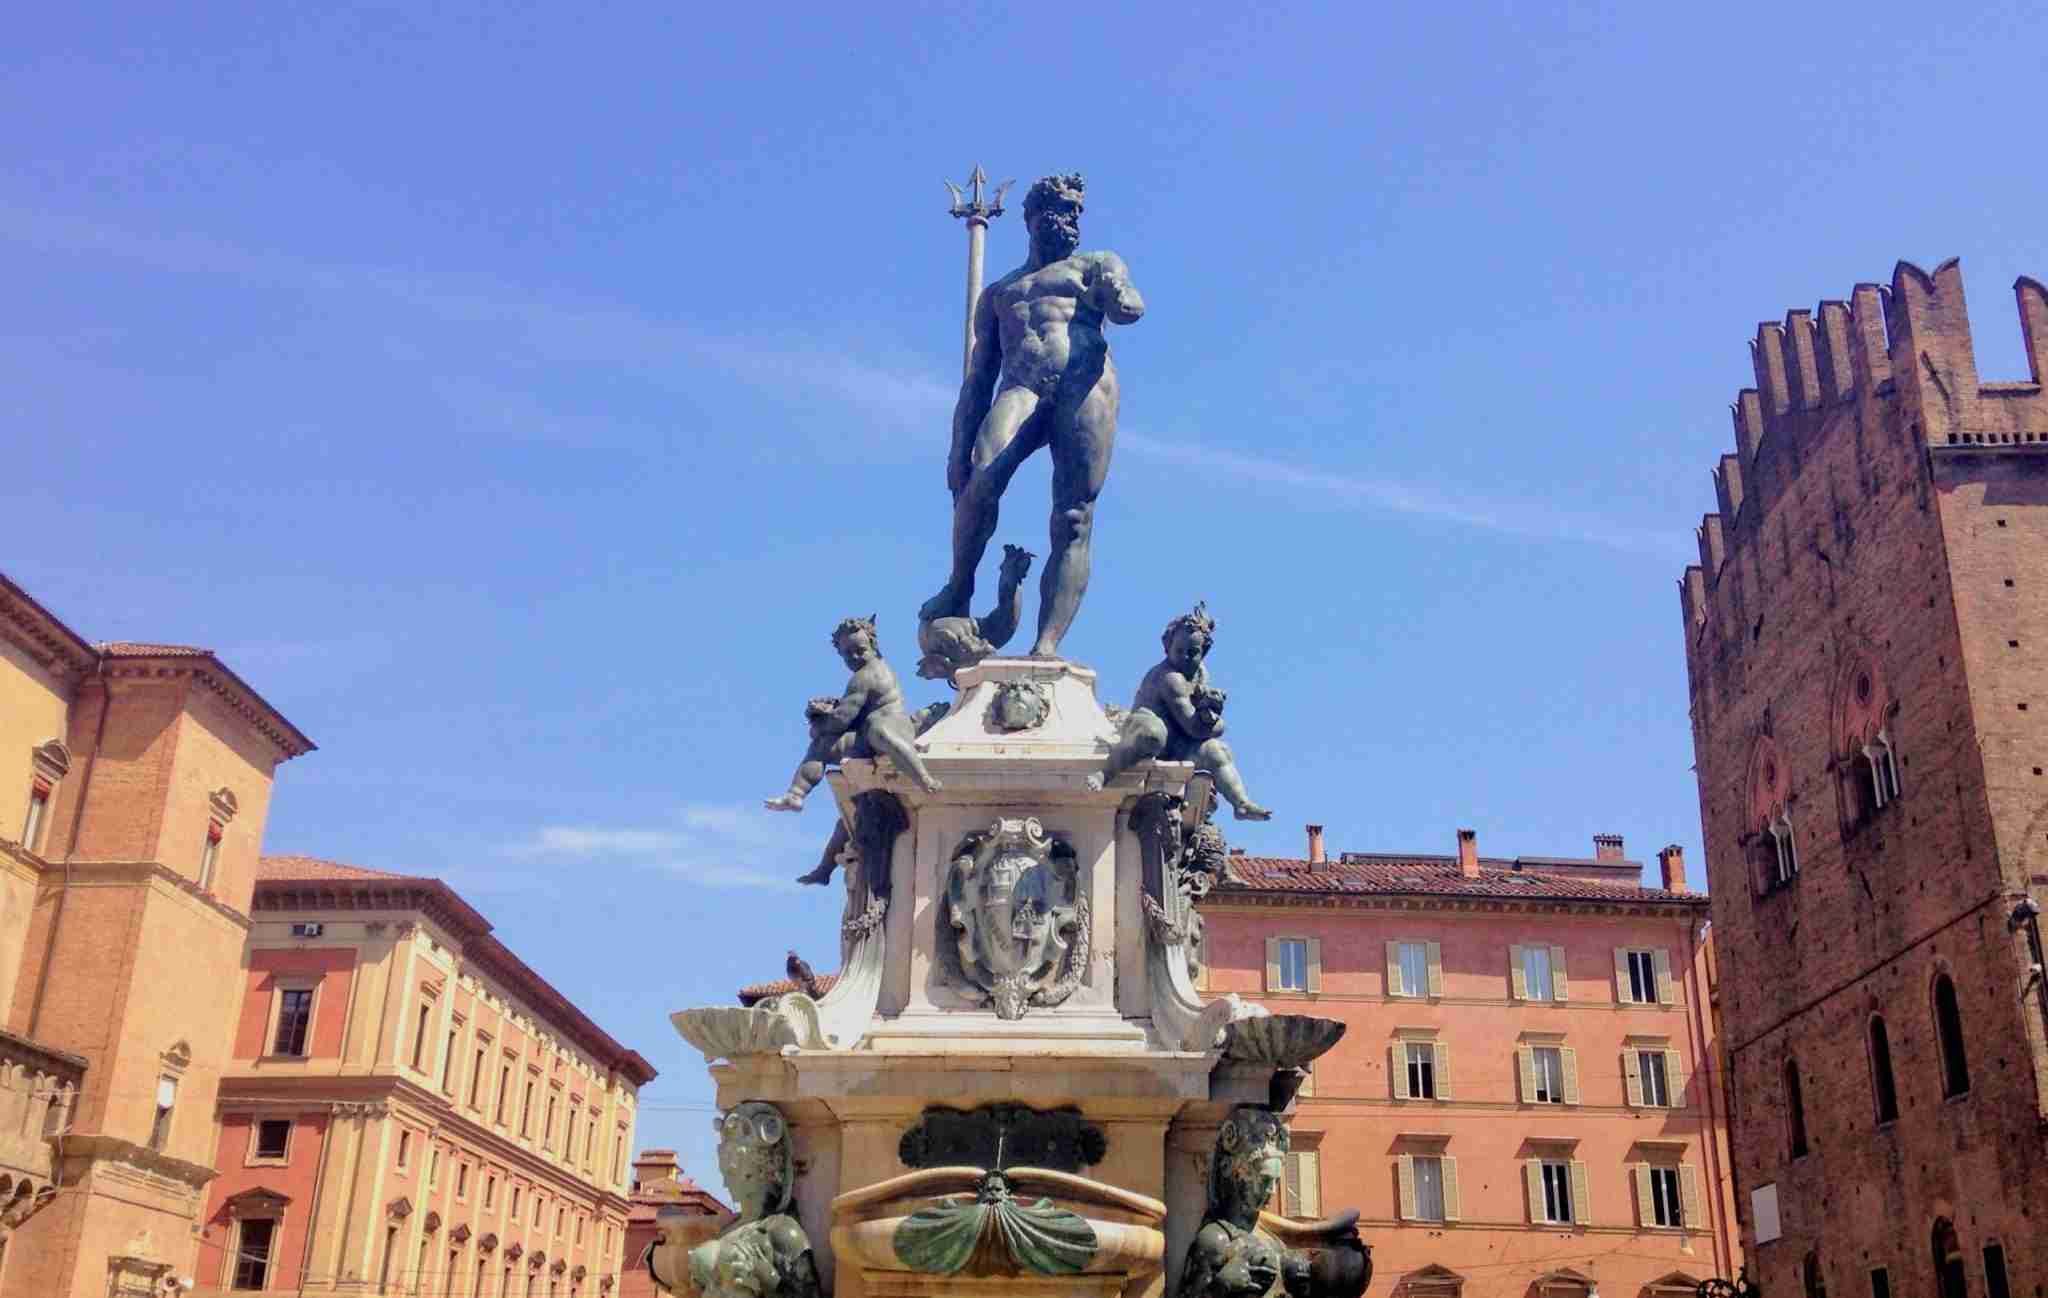 Statue of Neptune in Bologna, Italy. Photo by Melanie Renzulli